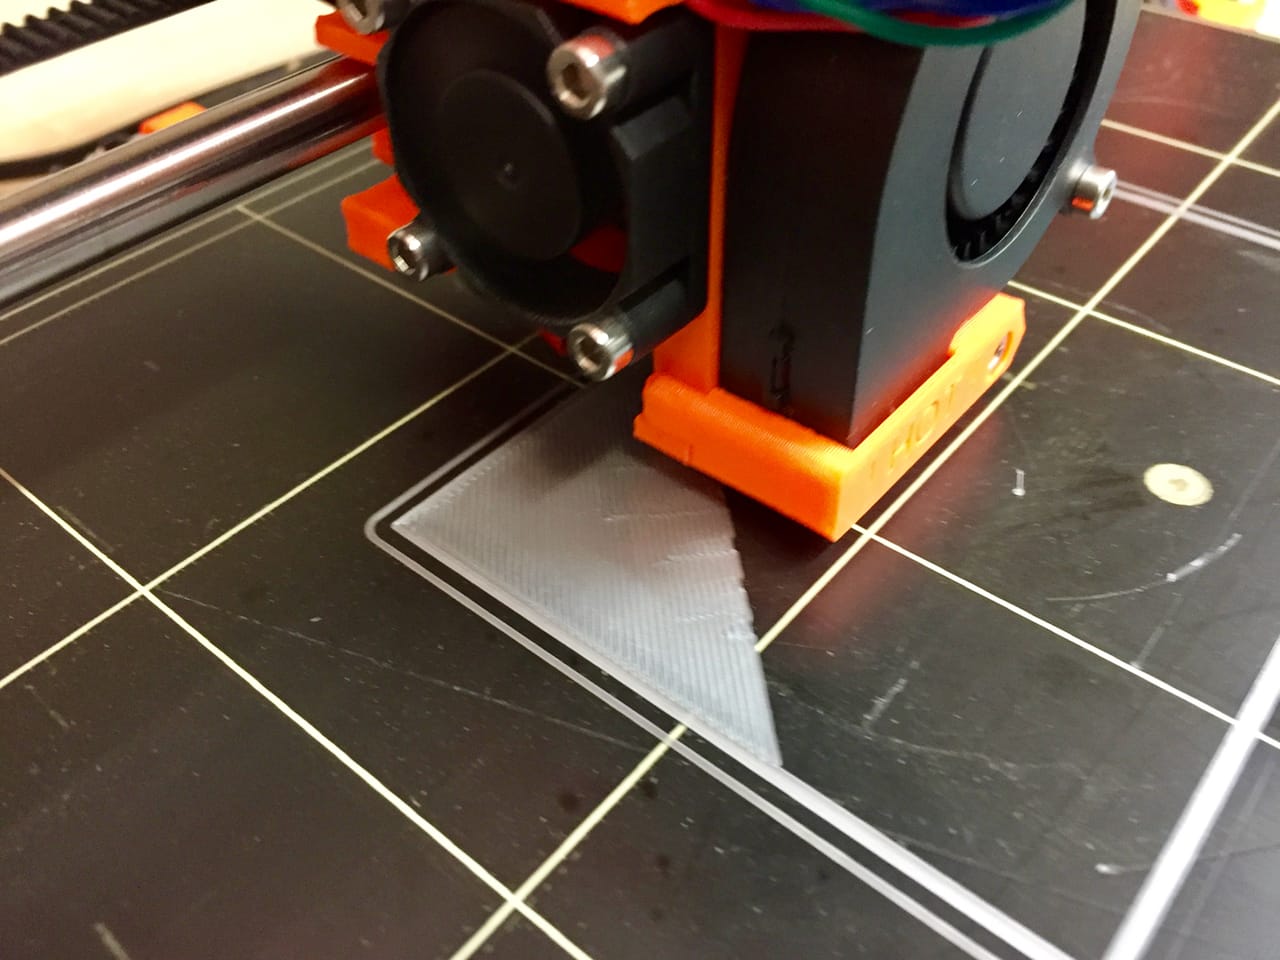  Incredibly fine first layers as a result of the Original Pruse i3 desktop 3D printer's automated leveling system 